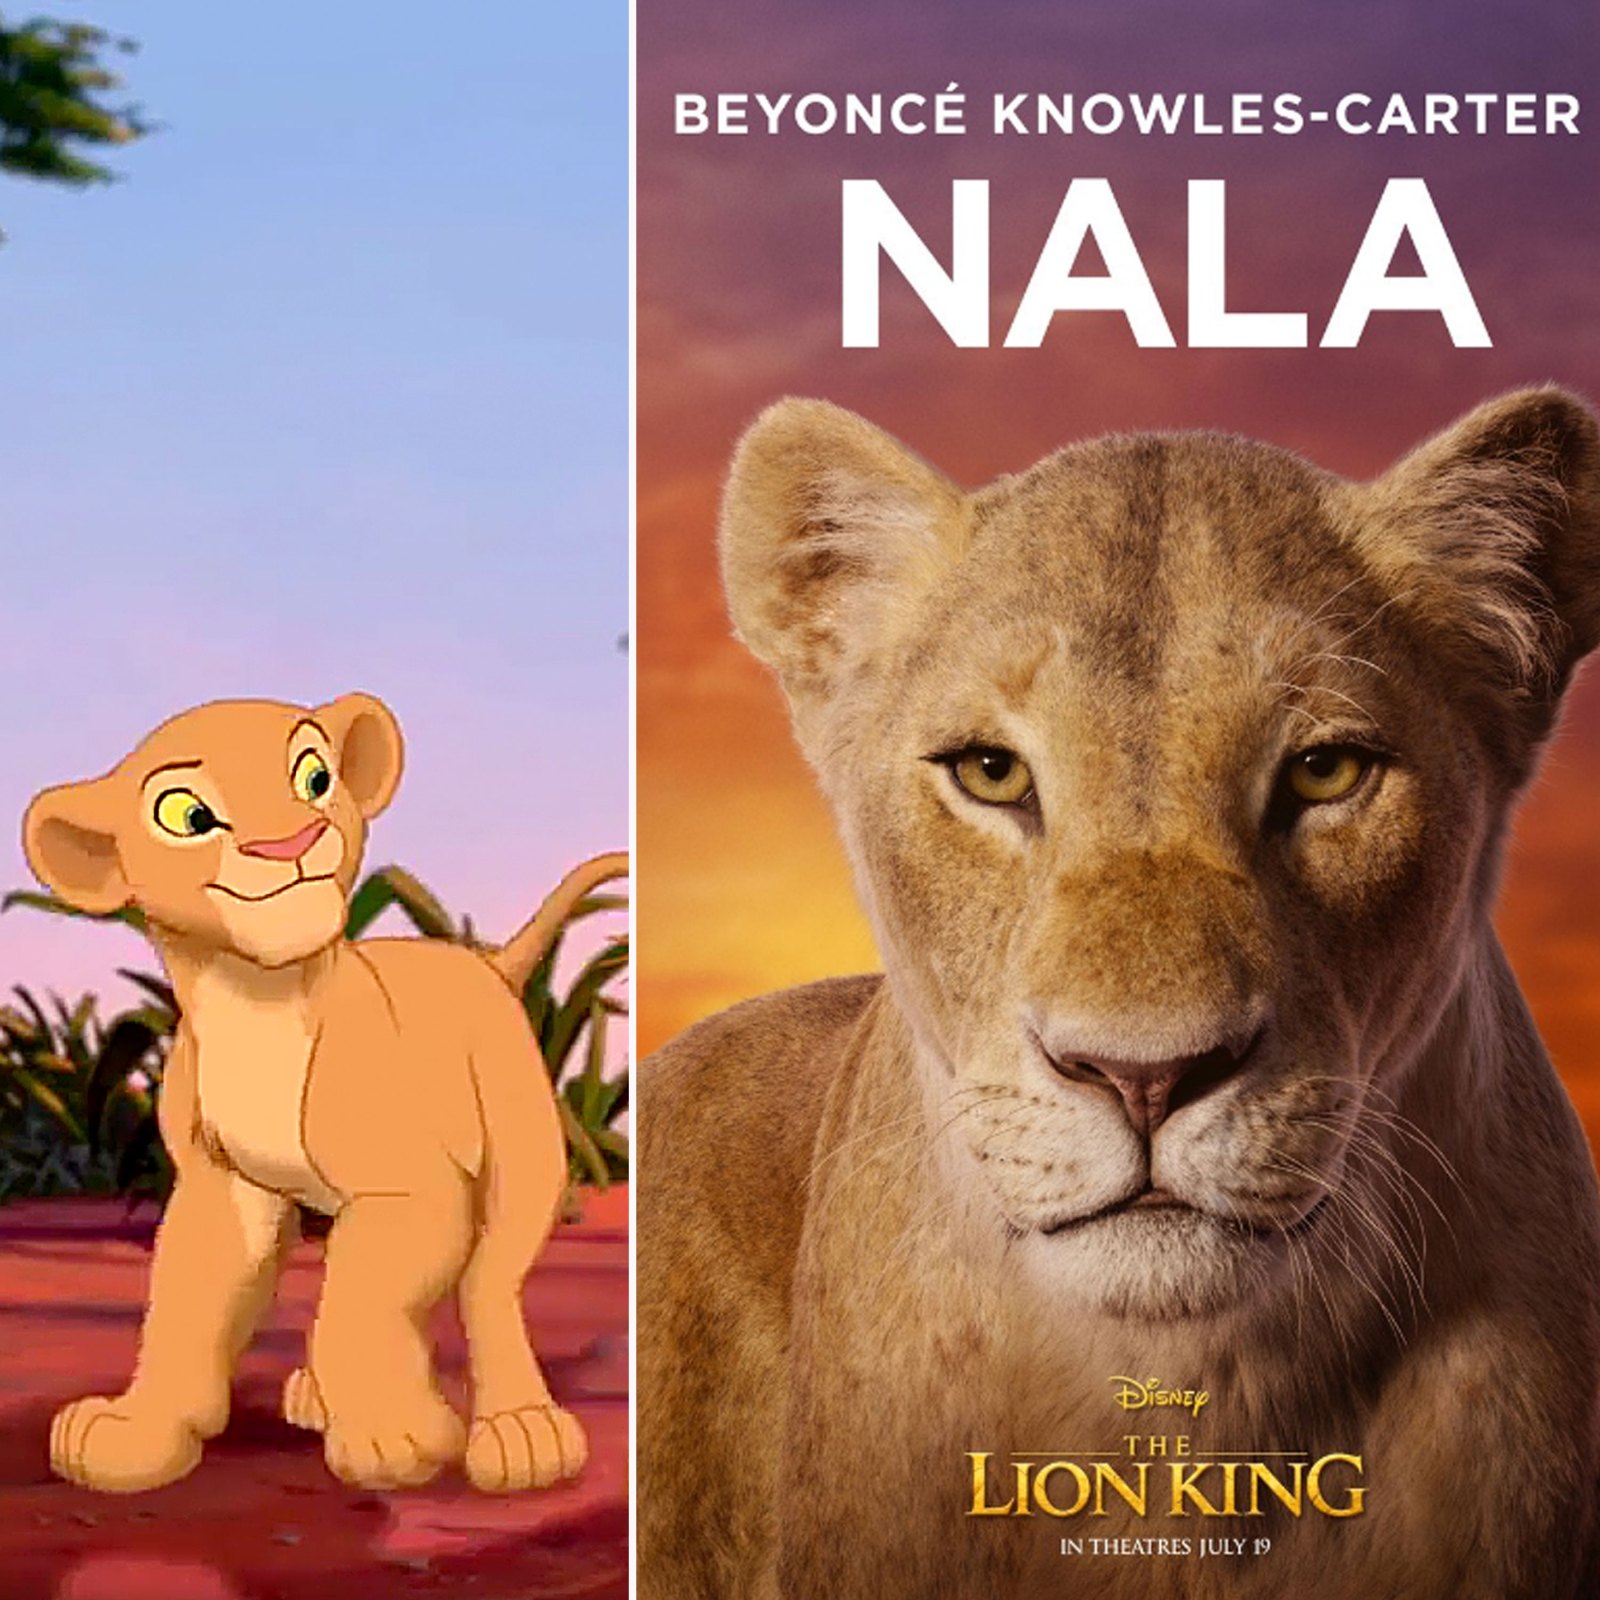 The Lion King Turns 25 Comparing the Animated and Live-Action Characters